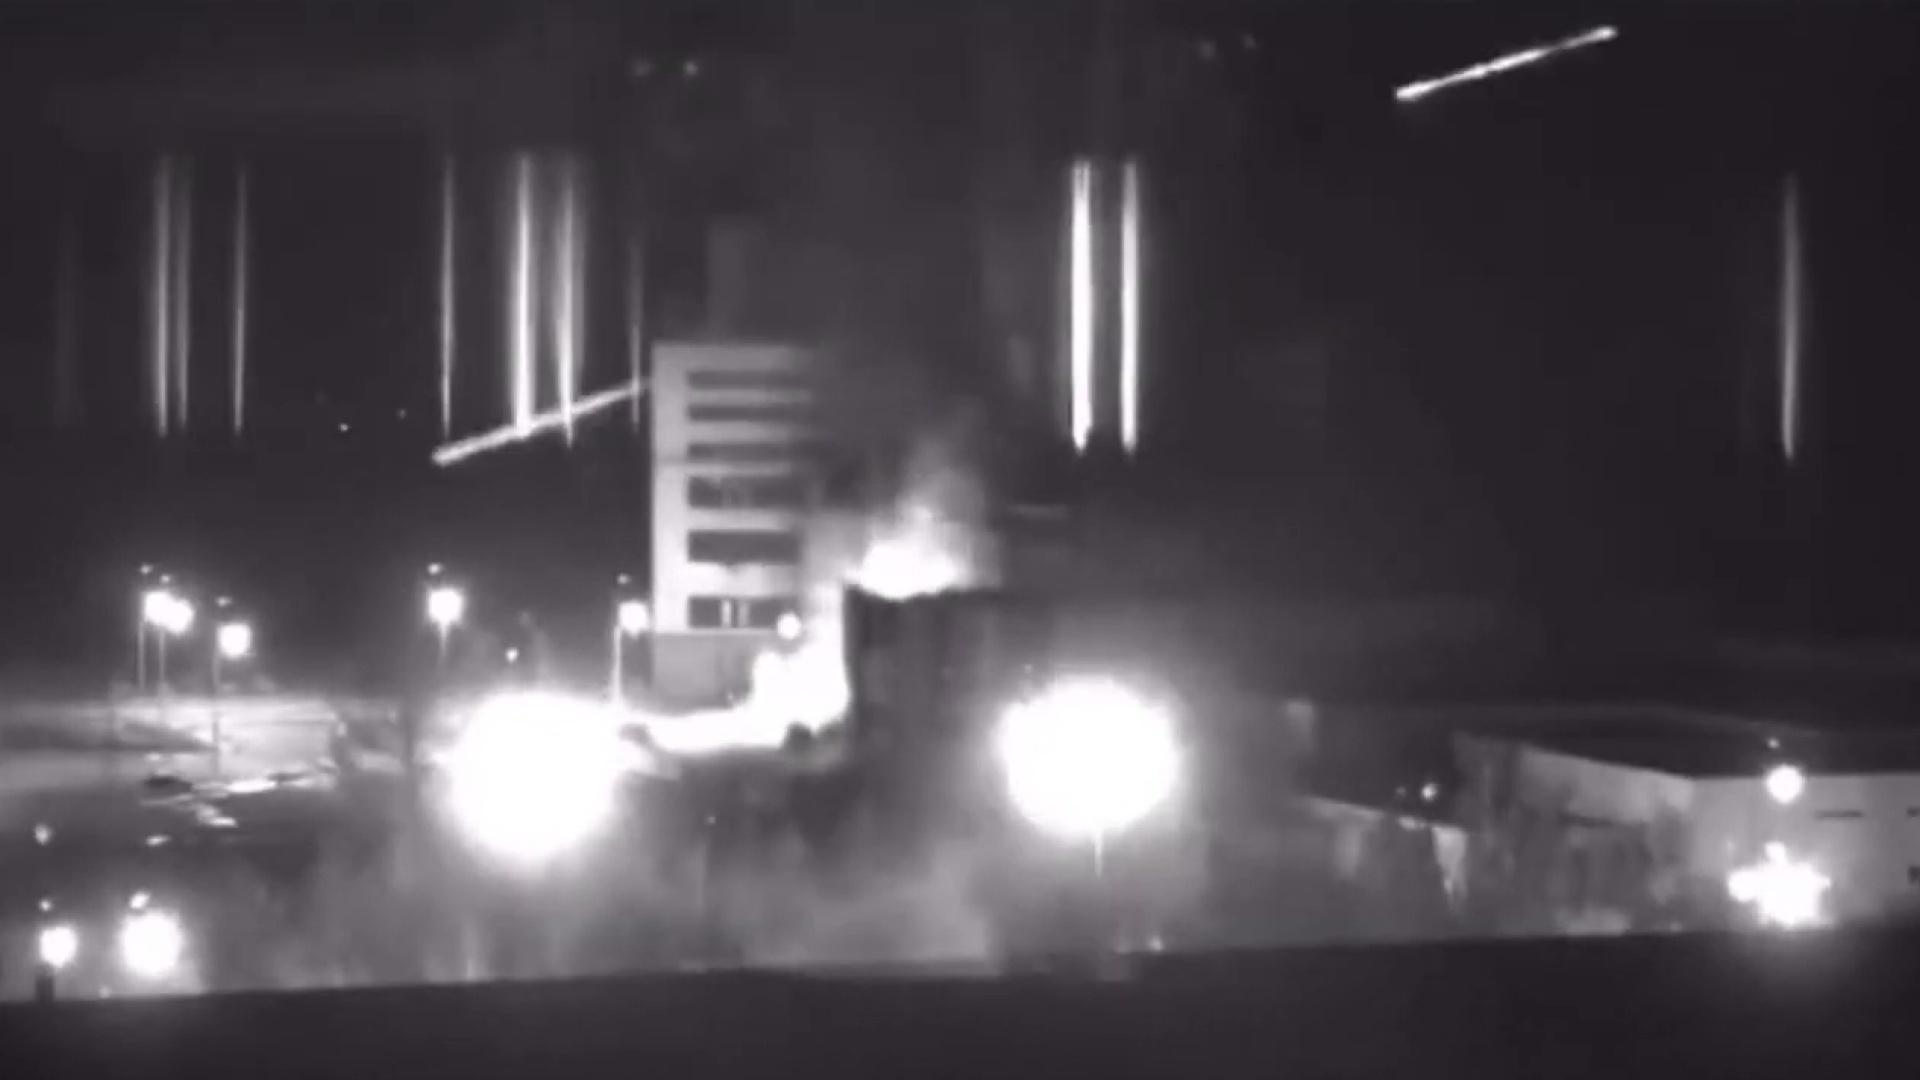 A screen grab captured from a video shows a view of Zaporizhzhia nuclear power plant during a fire following clashes around the site in Ukraine on March 4.